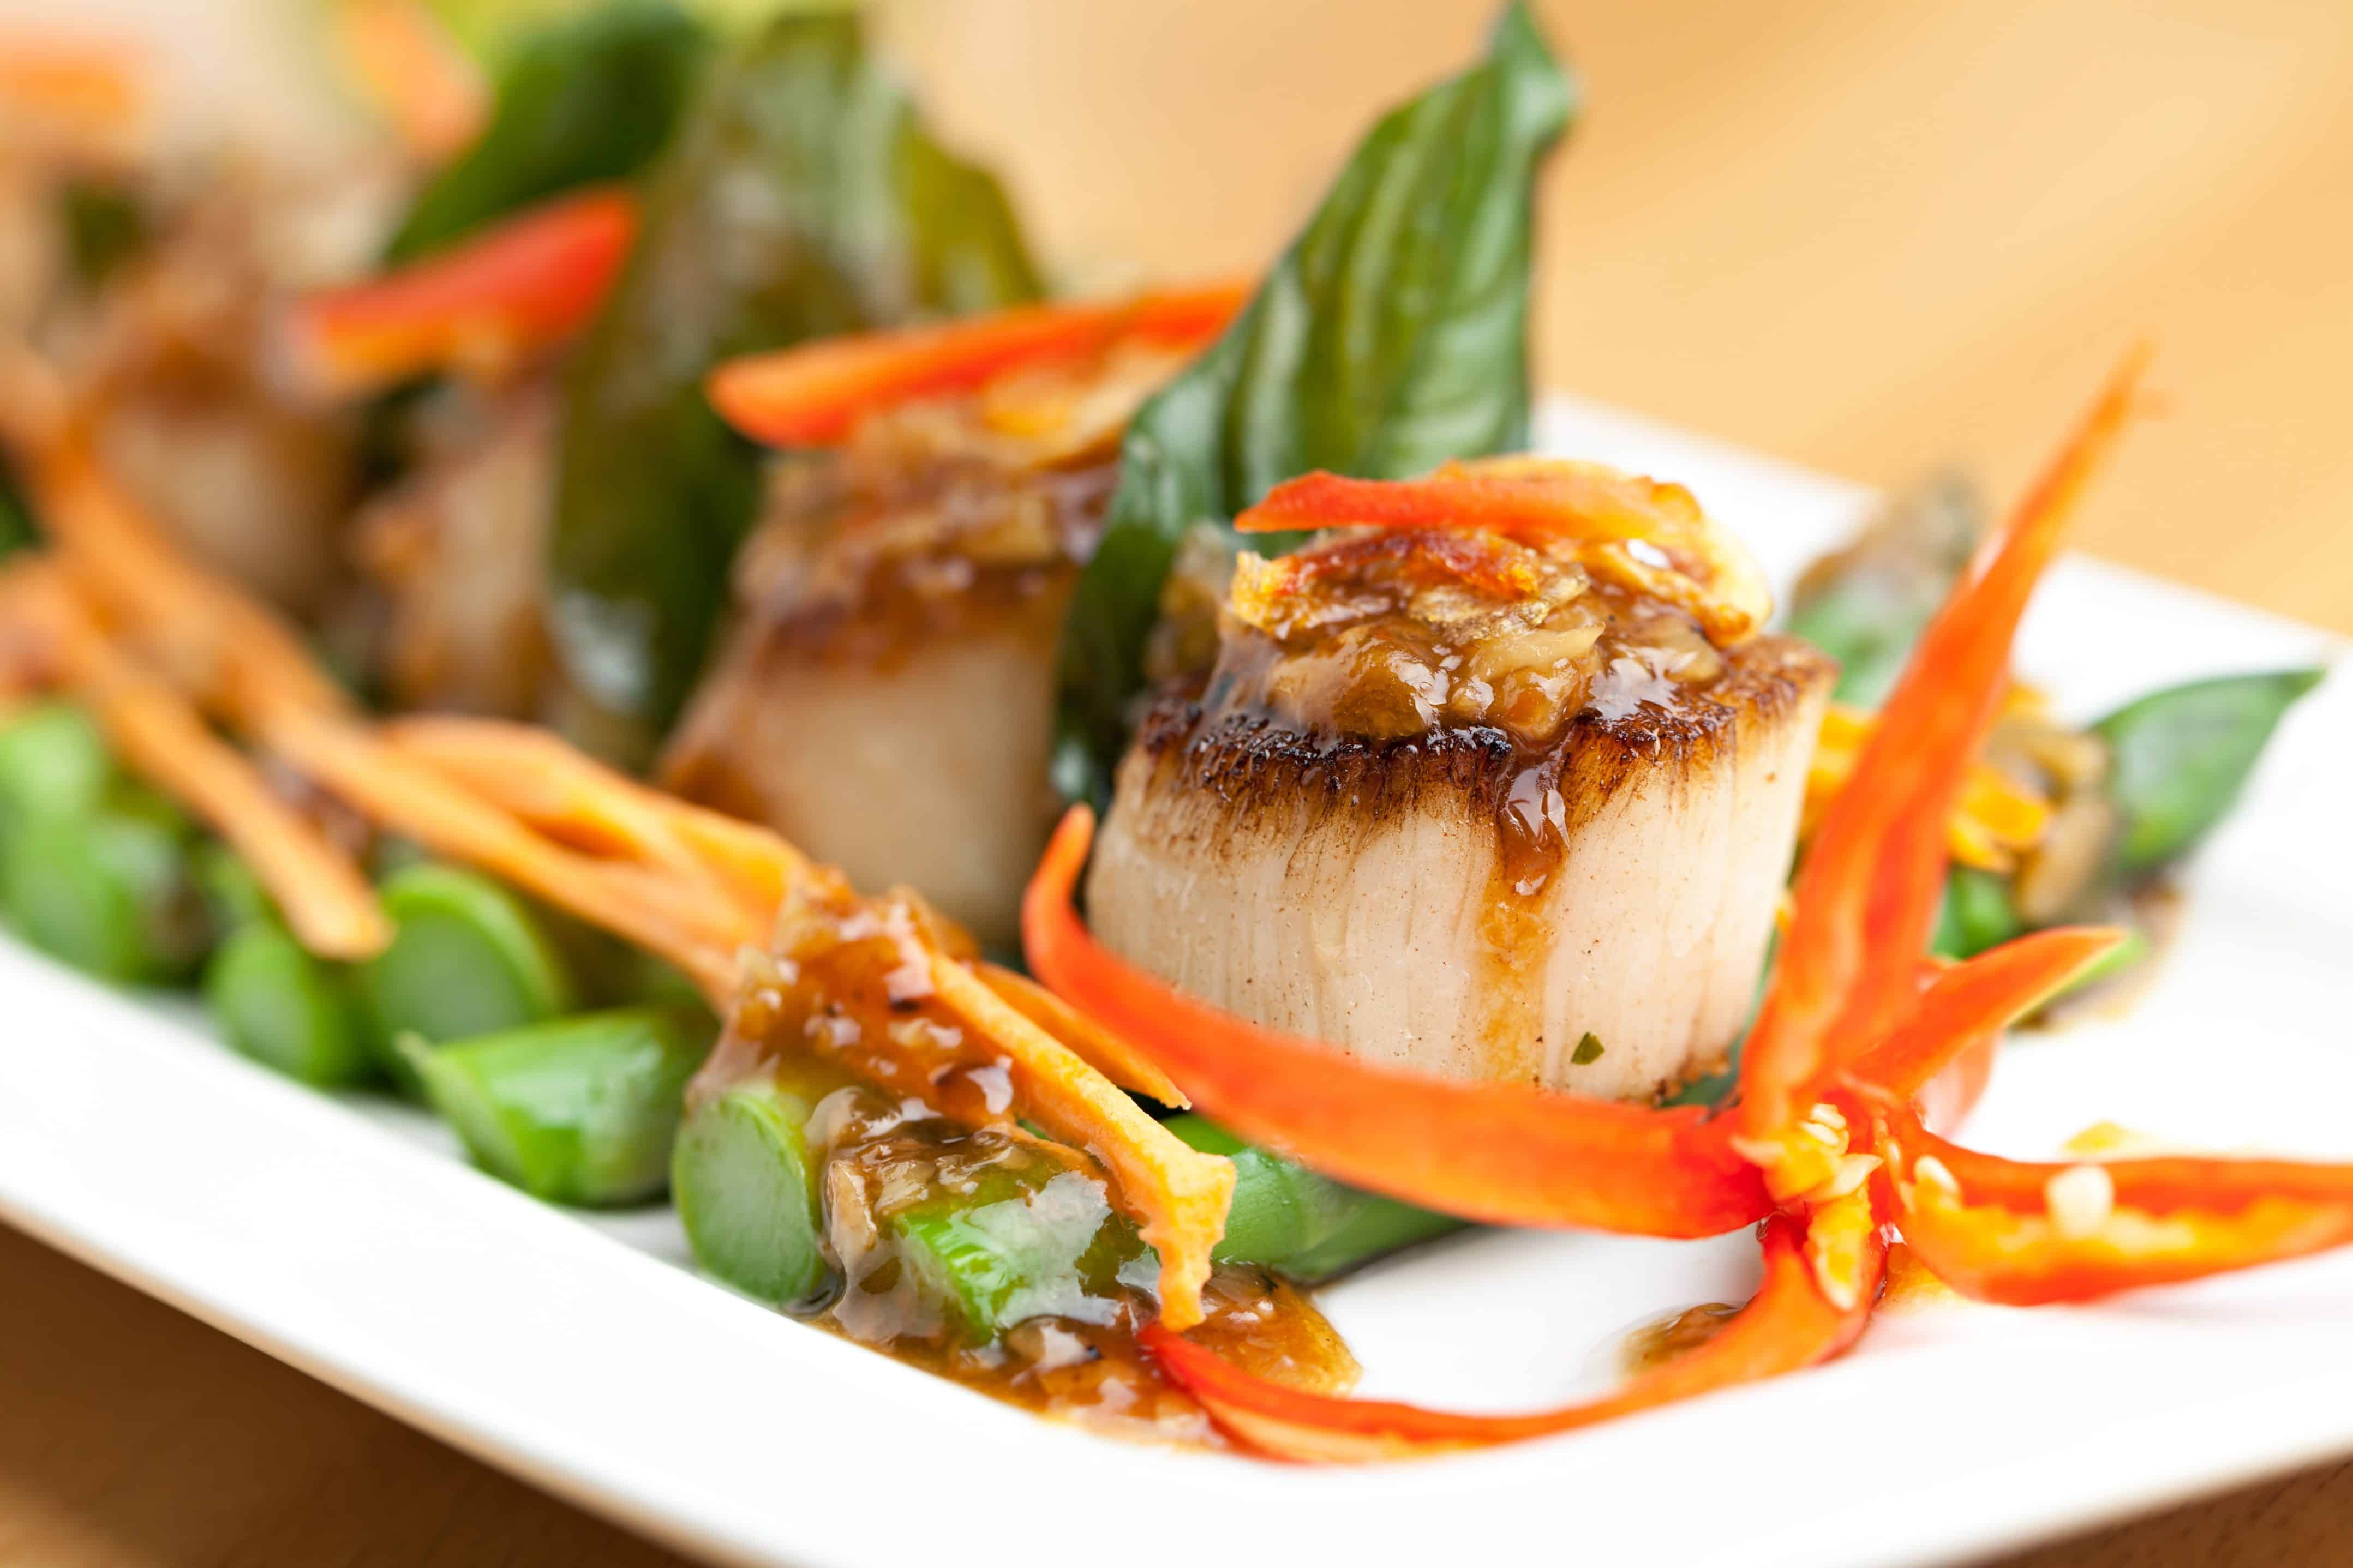 Spicy thai scallops on a bed of asparagus spears.